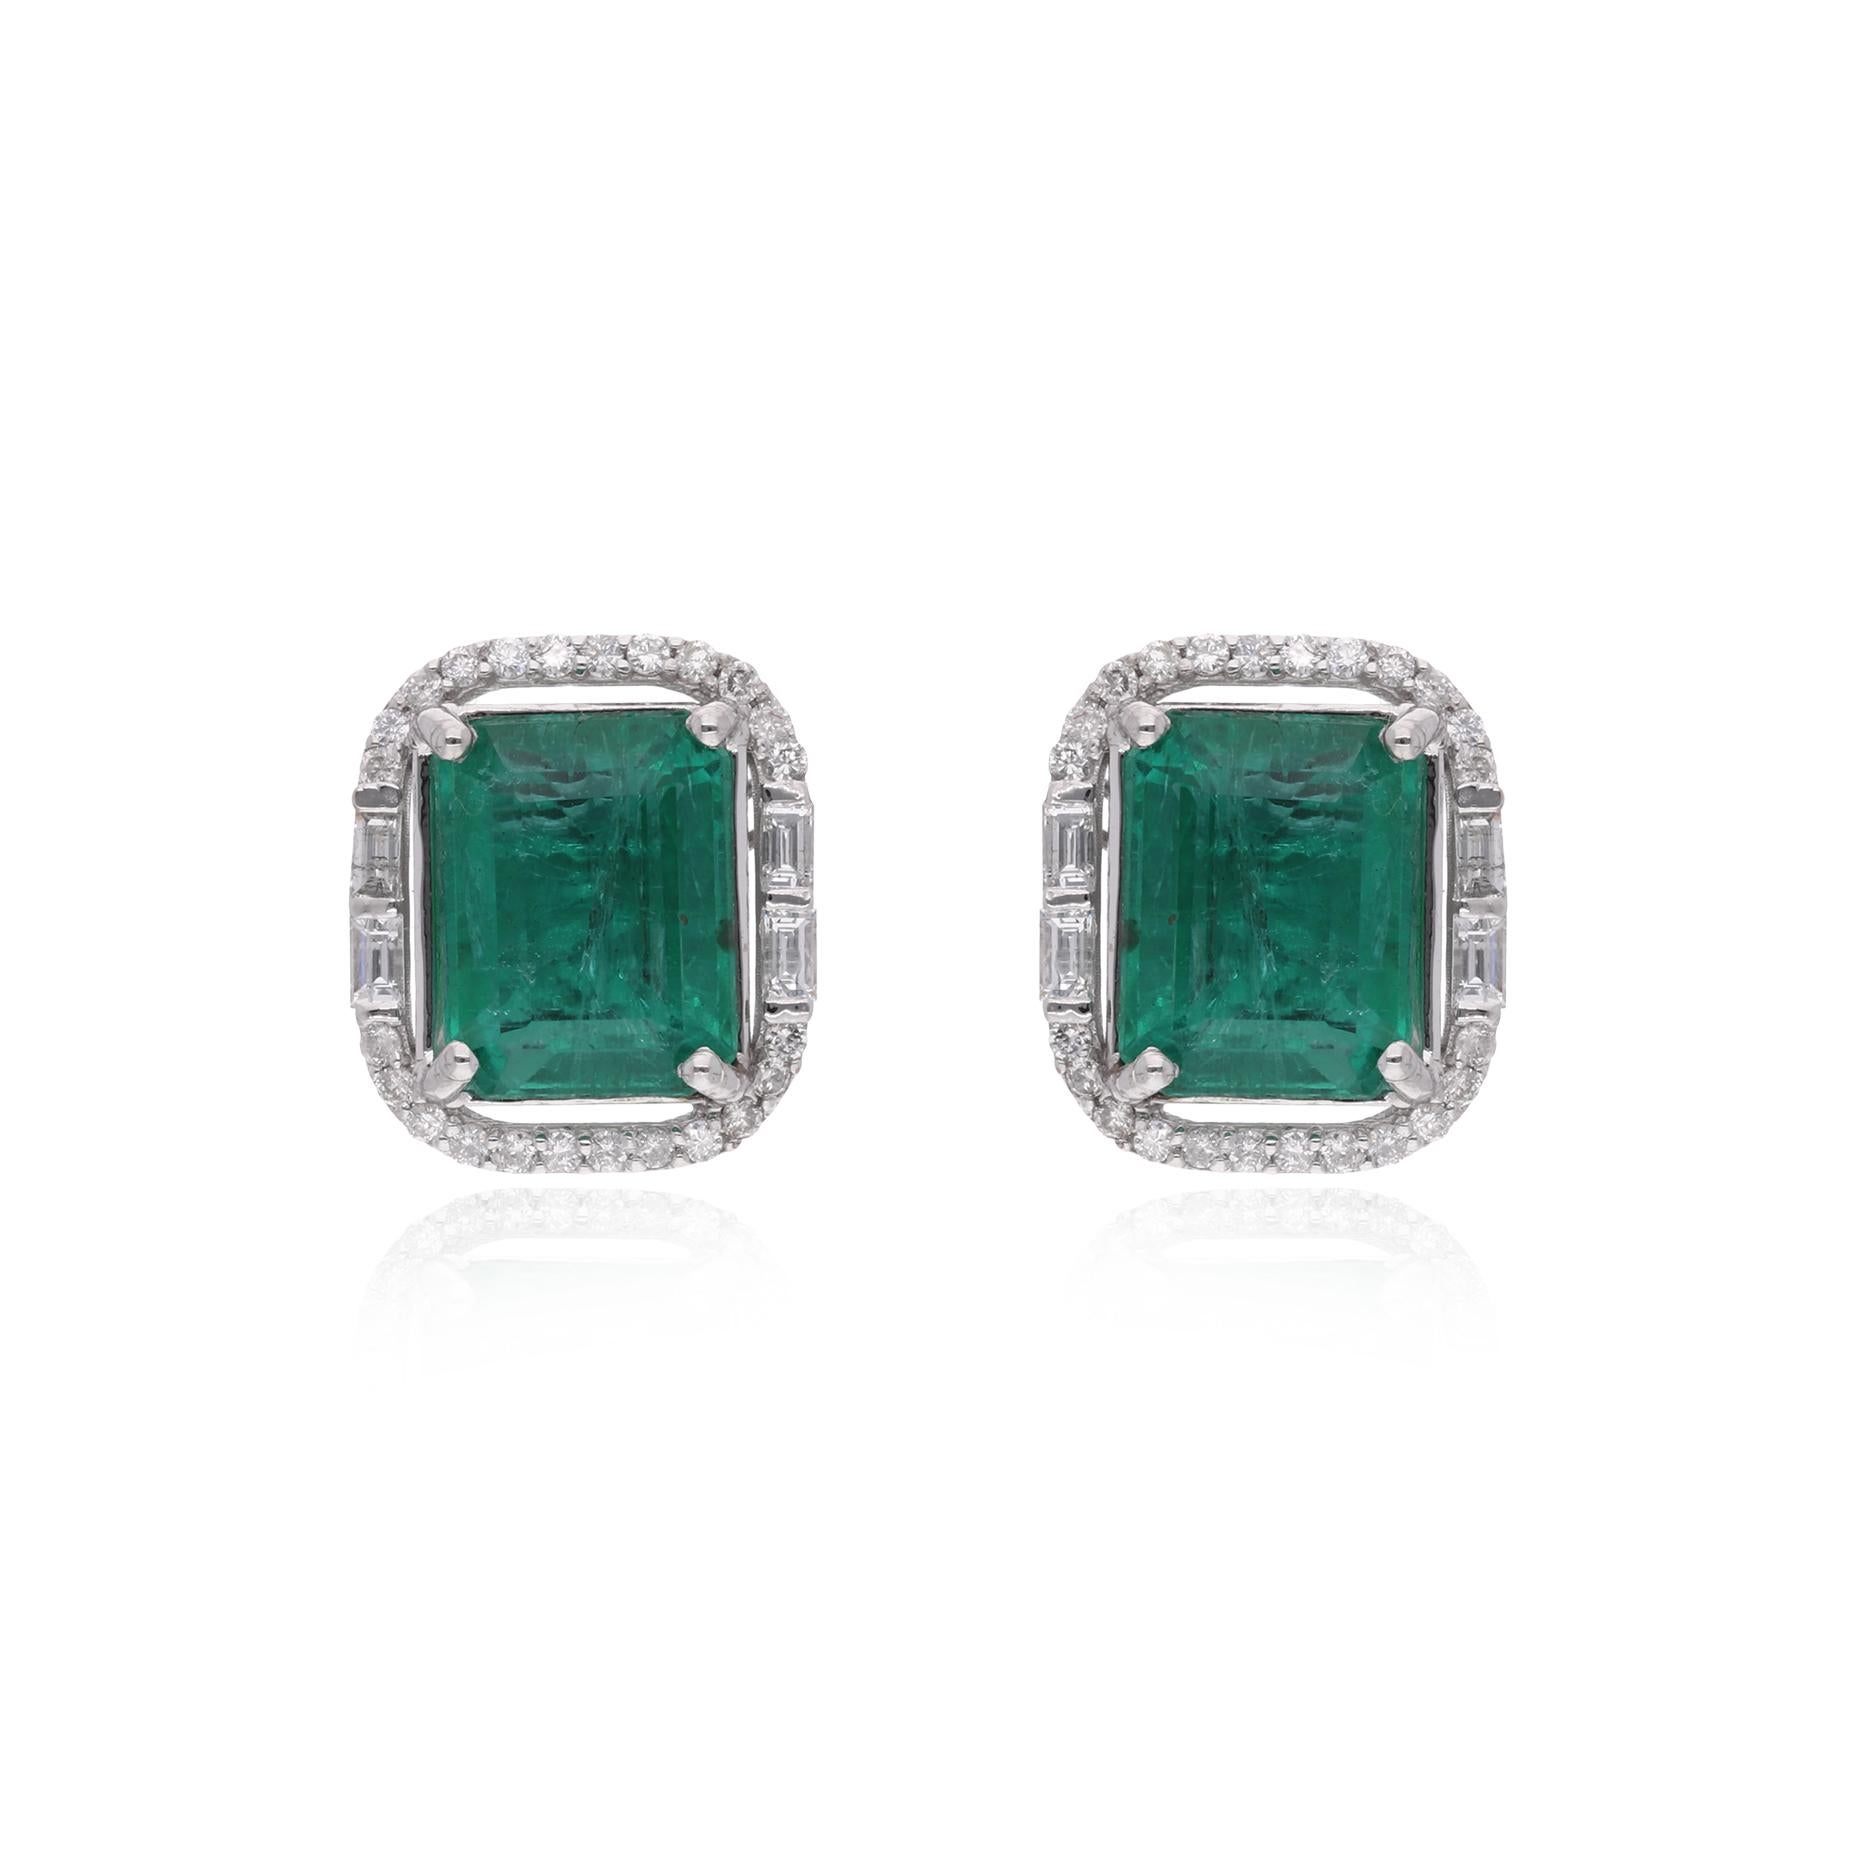 Add a touch of timeless elegance to your jewelry collection with these exquisite Diamond Emerald Stud Earrings. These earrings are perfectly accented by a beautiful emerald at the center, surrounded by a sparkling halo of diamonds. These earrings